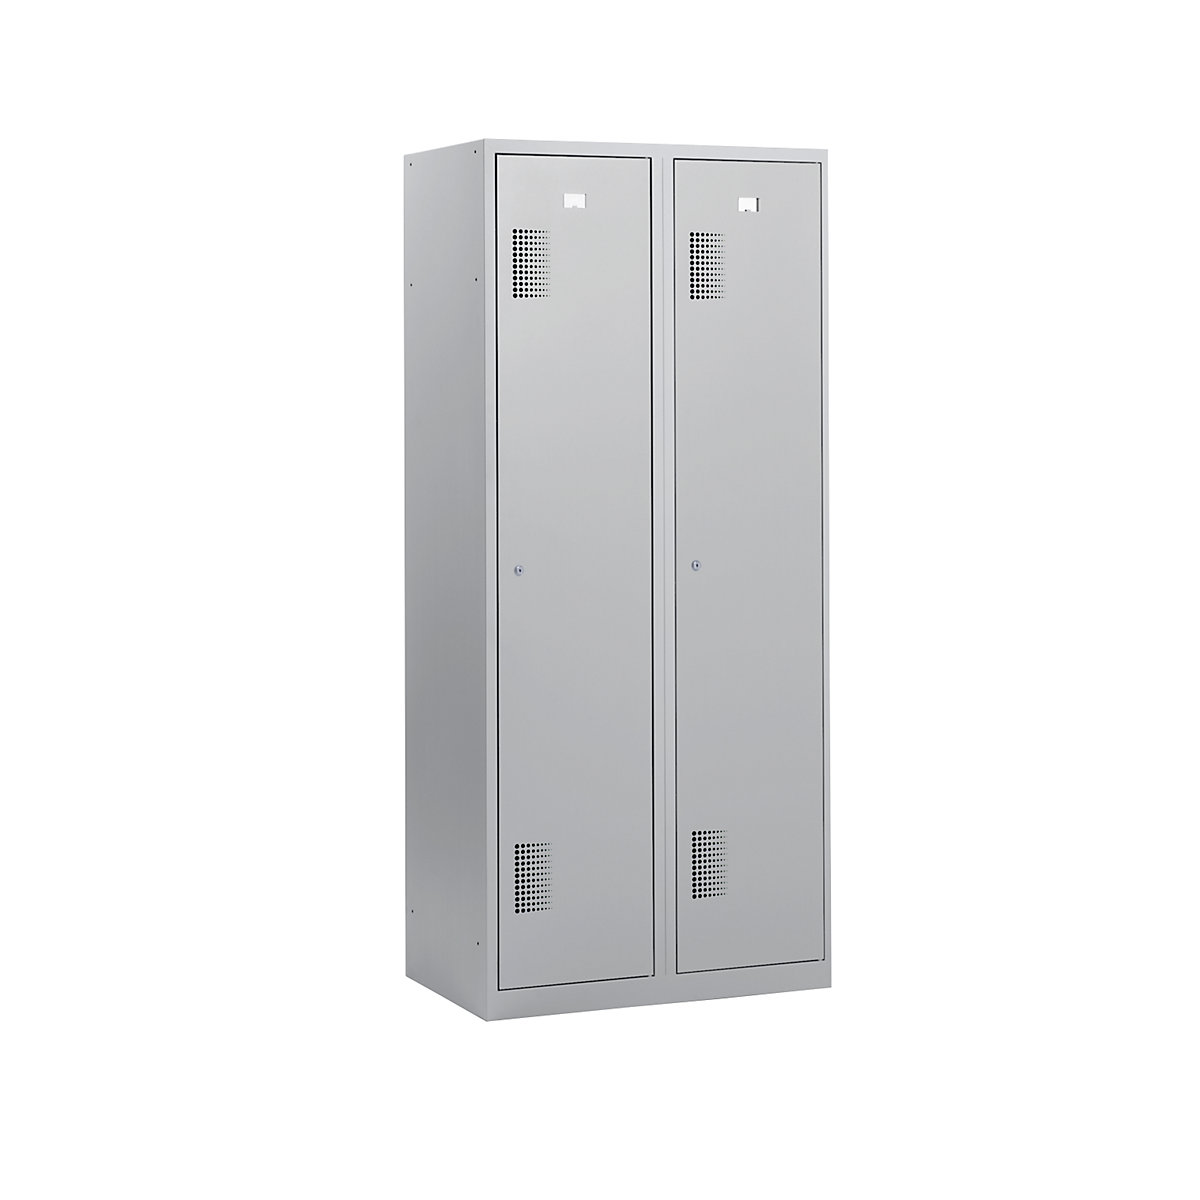 AMSTERDAM cloakroom locker – eurokraft basic, height 1800 mm, width 800 mm, 2 x 398 mm wide compartments, with cylinder lock, completely light grey-26